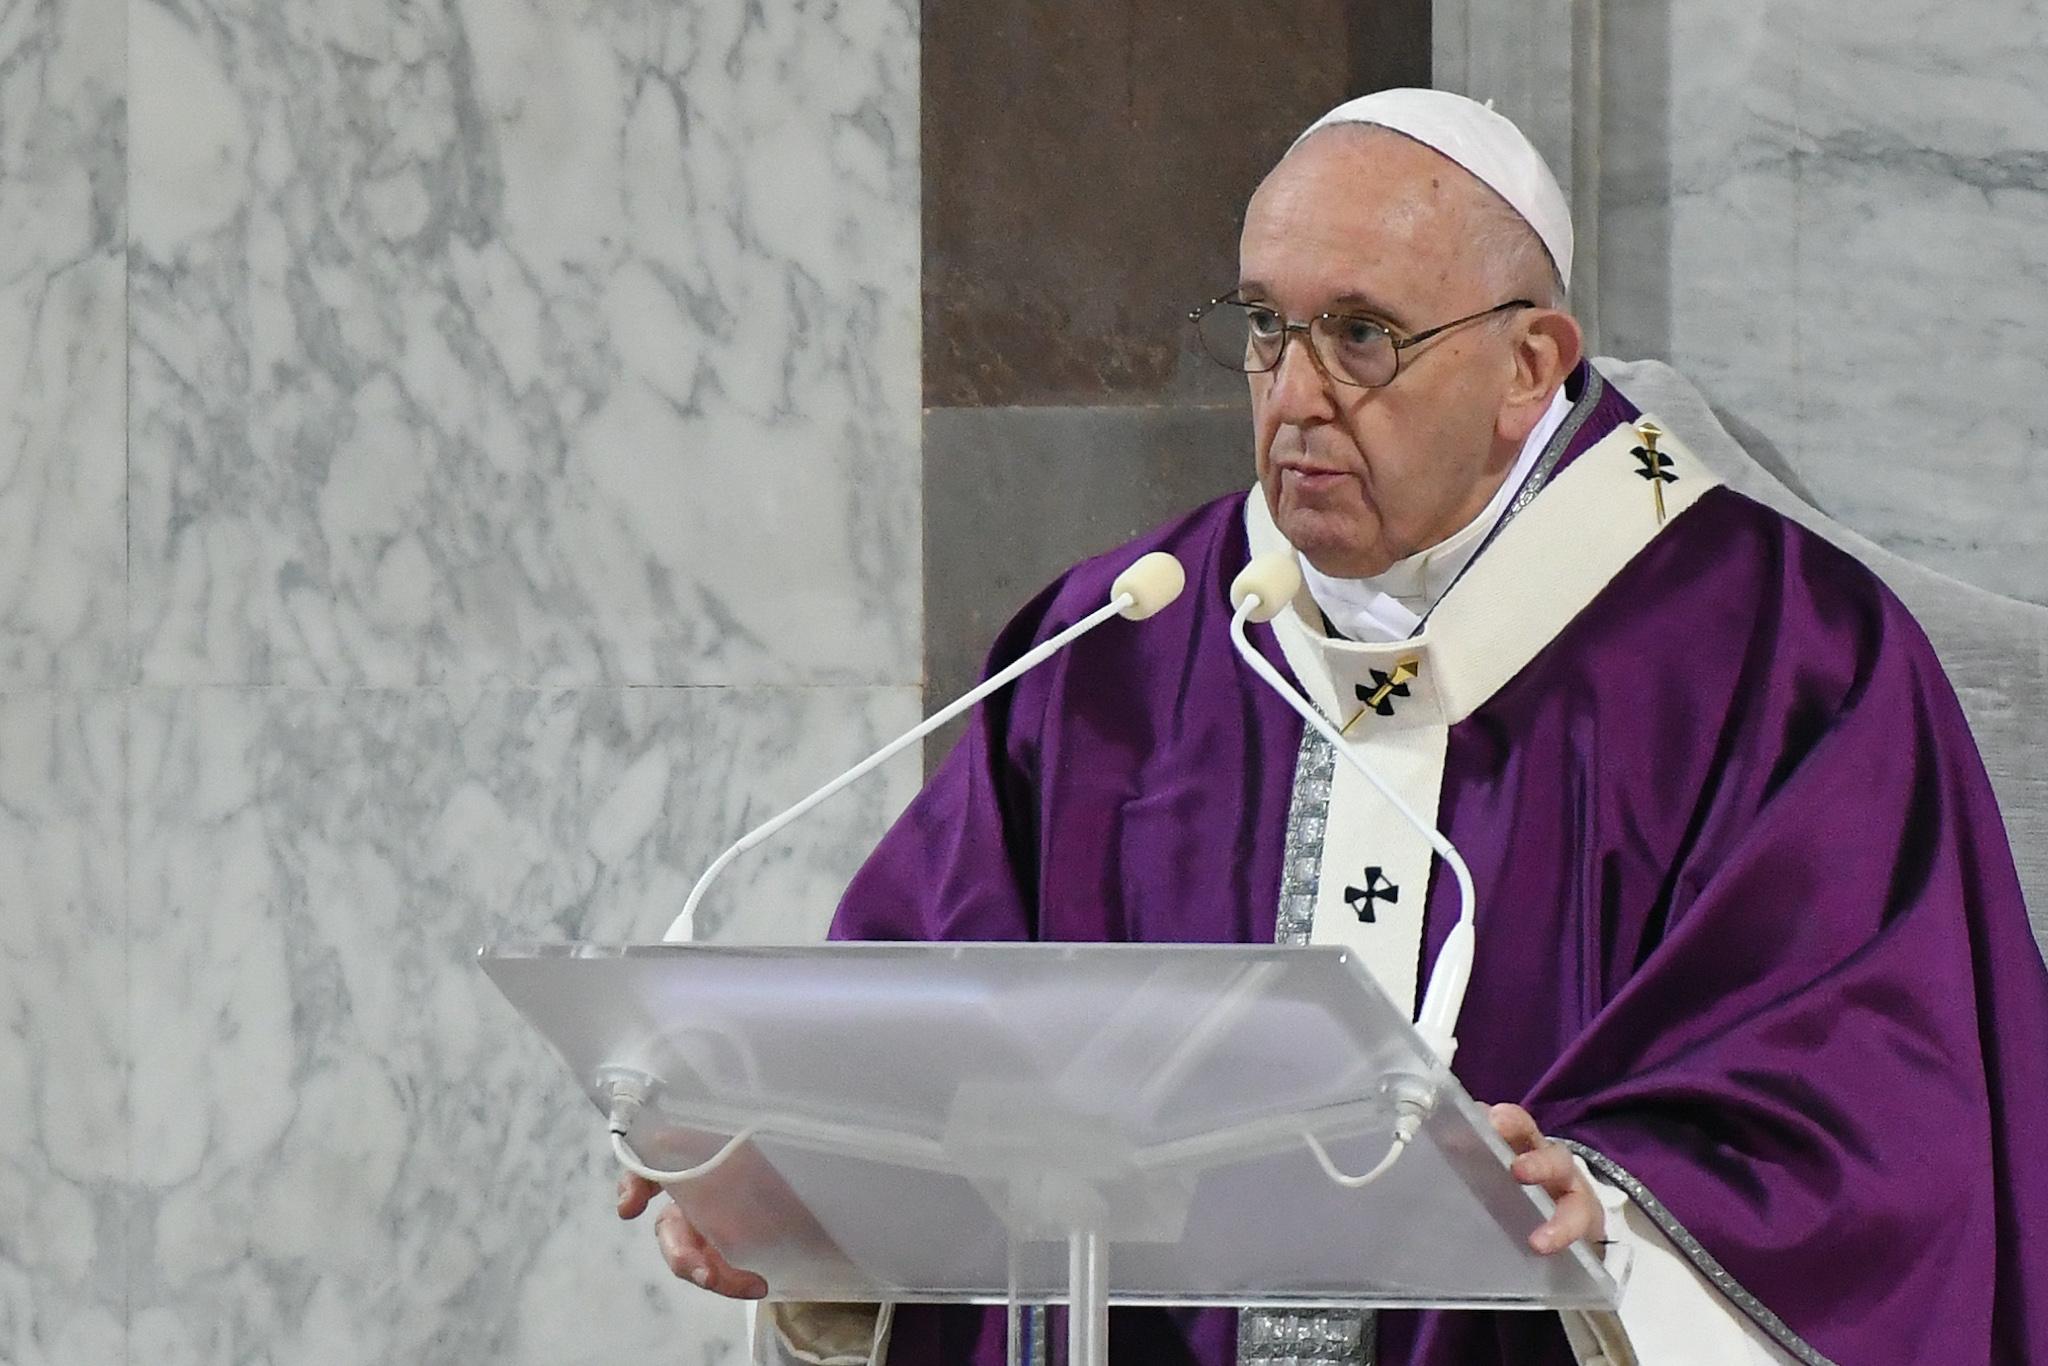 Pope Francis leads the Ash Wednesday mass which opens Lent, the forty-day period of abstinence and deprivation for Christians before Holy Week and Easter, on February 26, 2020, at the Santa Sabina church in Rome